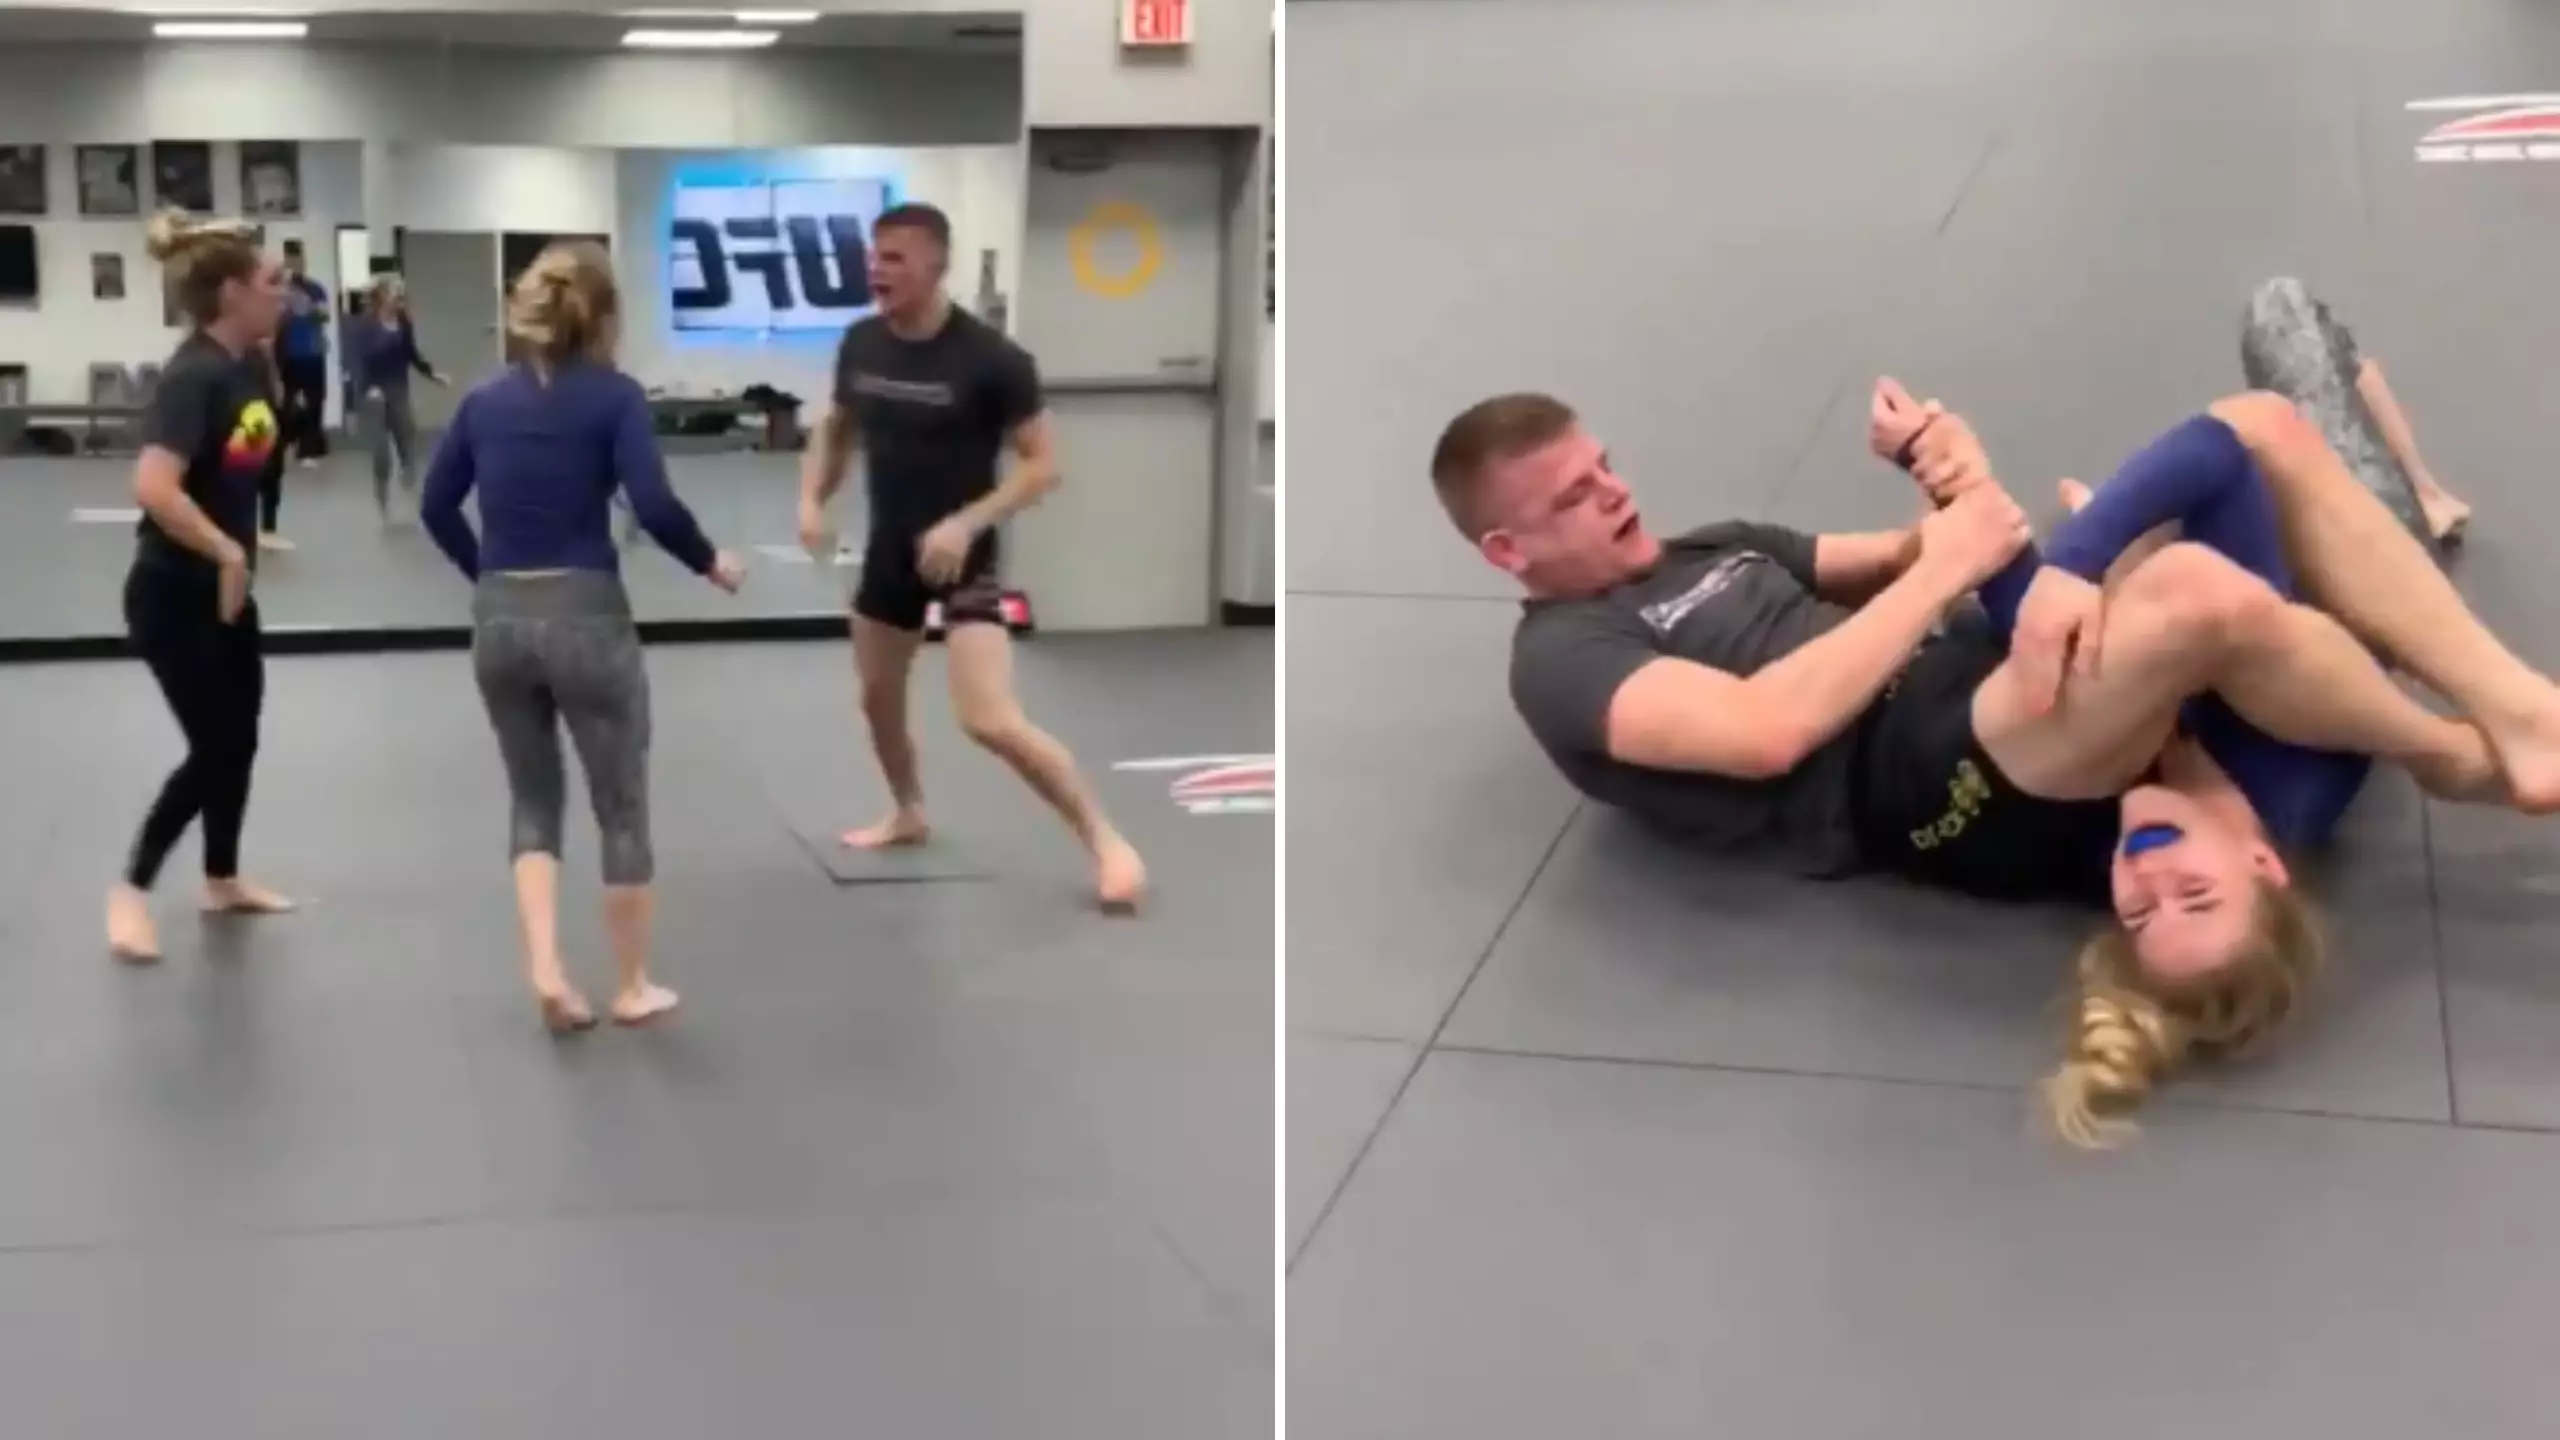 UFC Fighter Grant Dawson Takes On Two Female Fighters In Grappling Contest And Wins